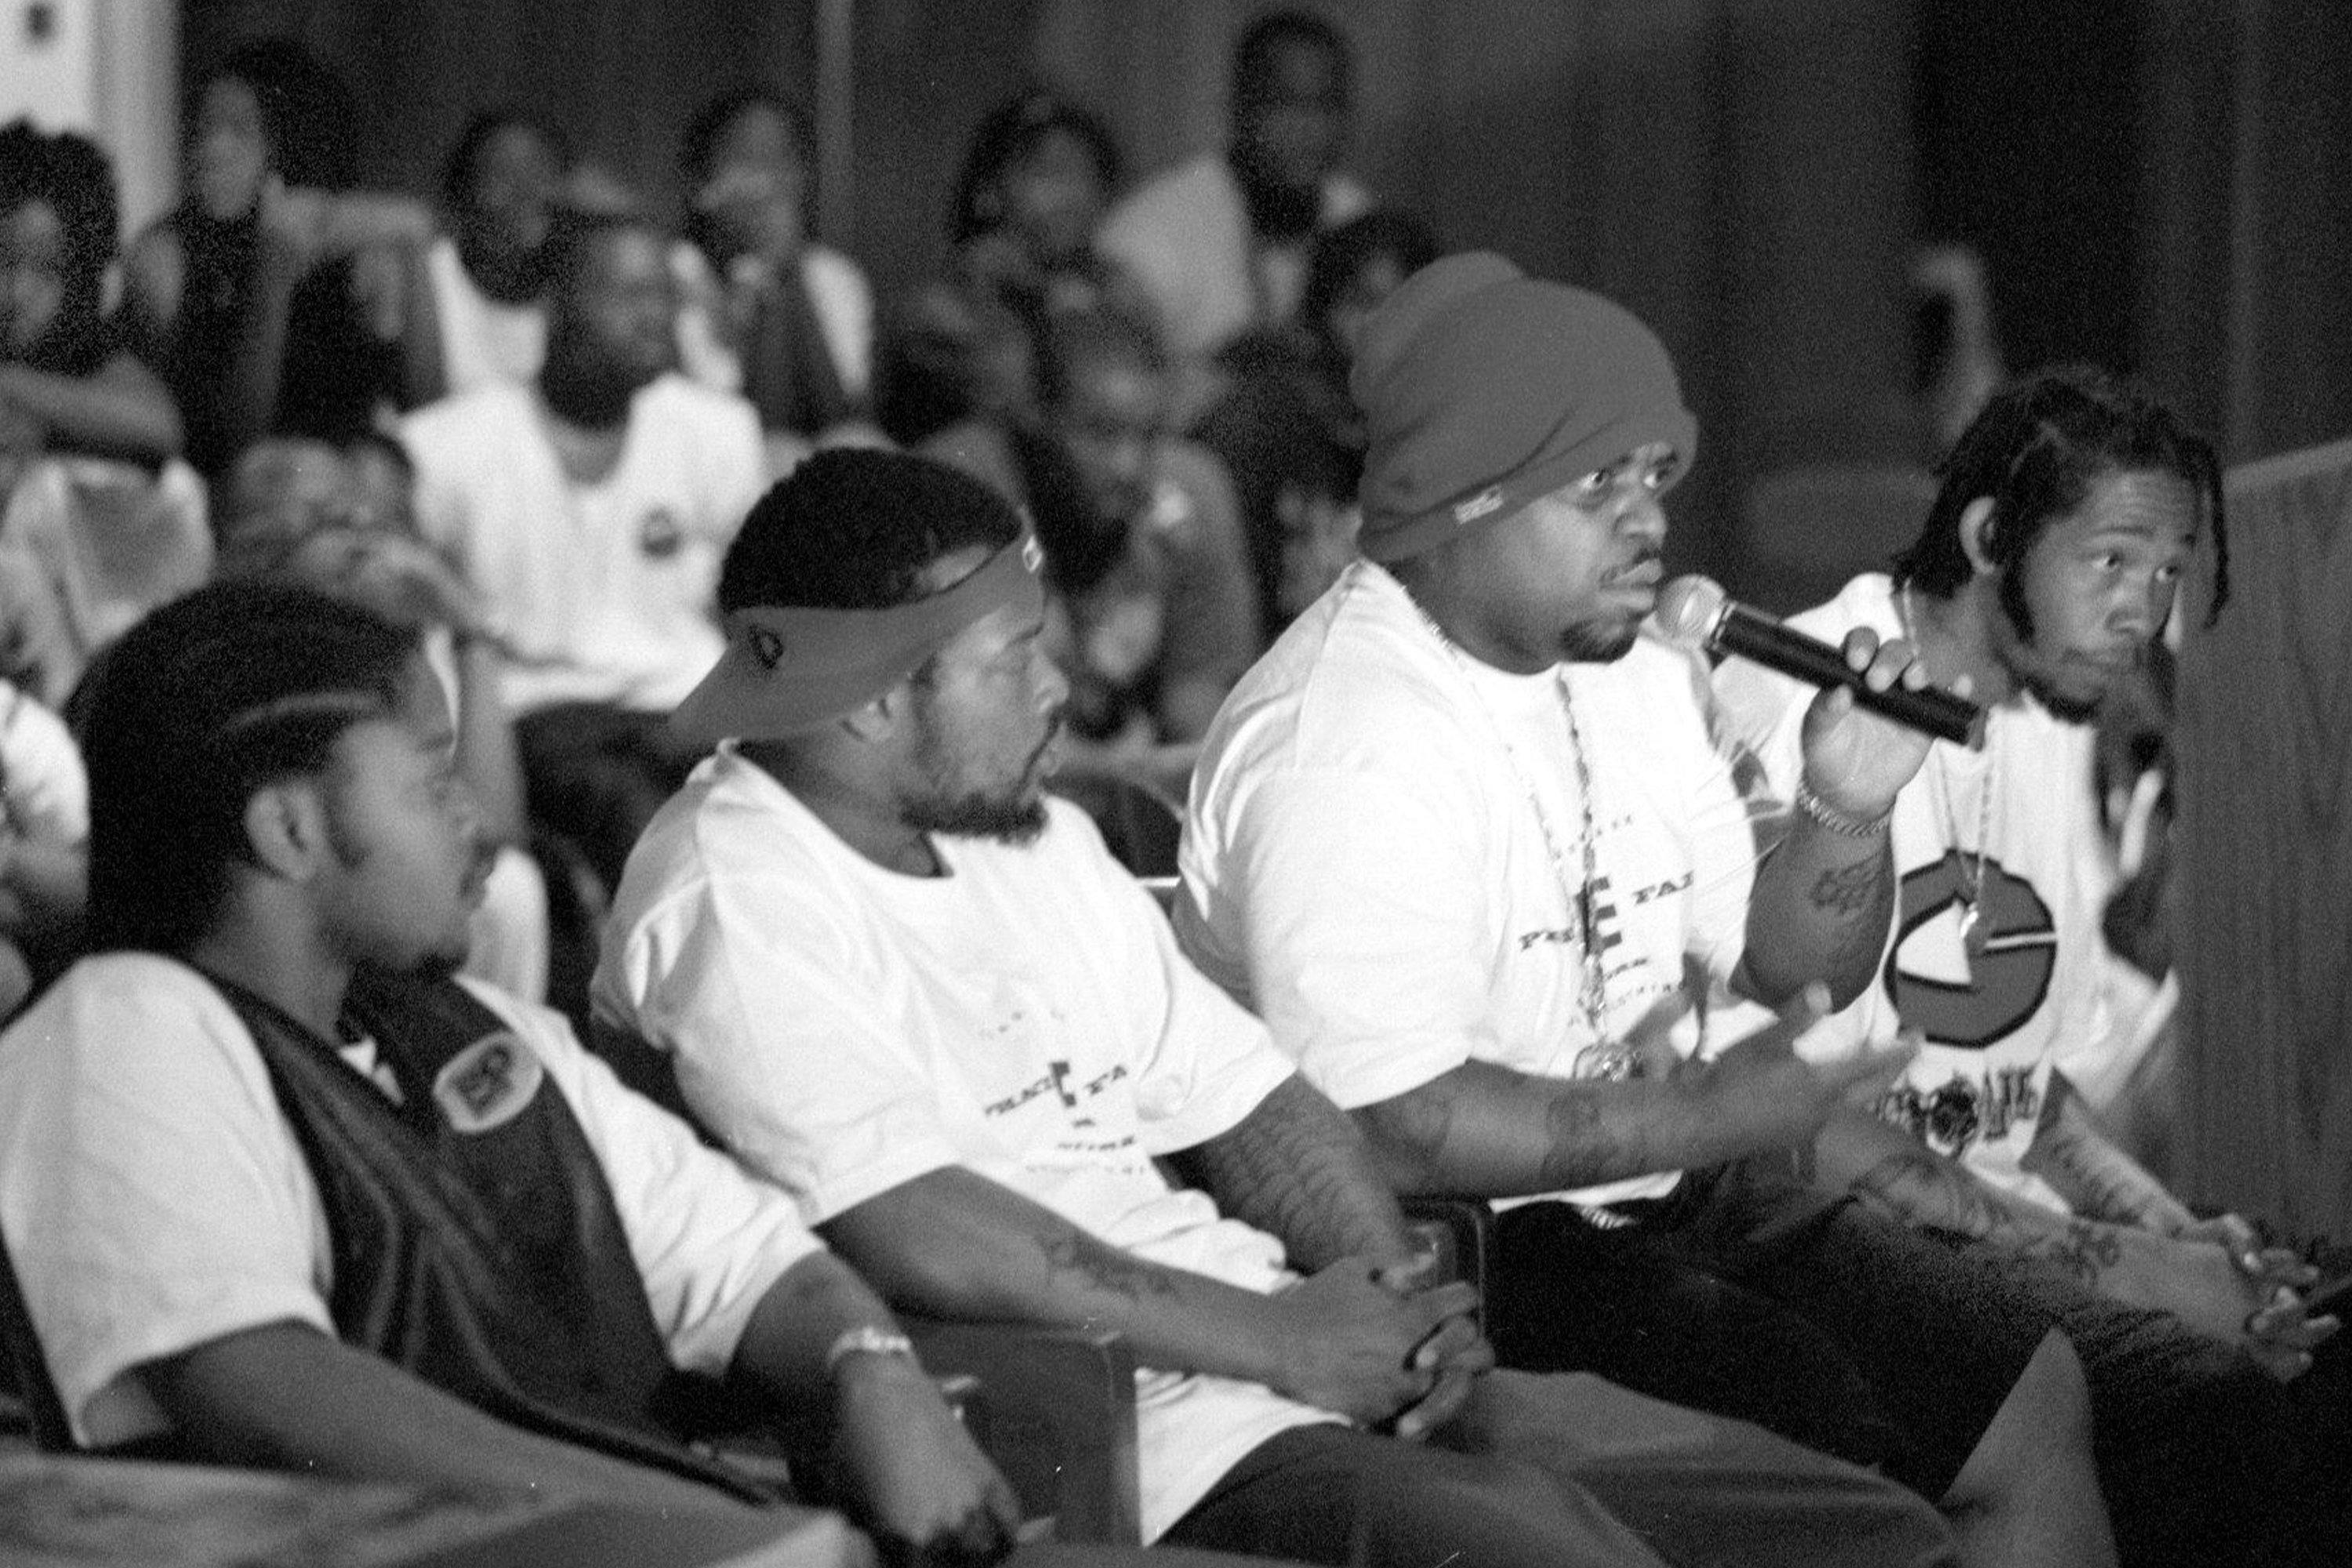 Goodie Mob hosted a workshop at H.D. Woodson Senior High School where they talked instead of performing. LTR members of Goodie Mob, T-Mo, Khujo, speaking is Cee-Lo, and far right is Big Gipp. (Photo by James M. Thresher/The The Washington Post via Getty Images)